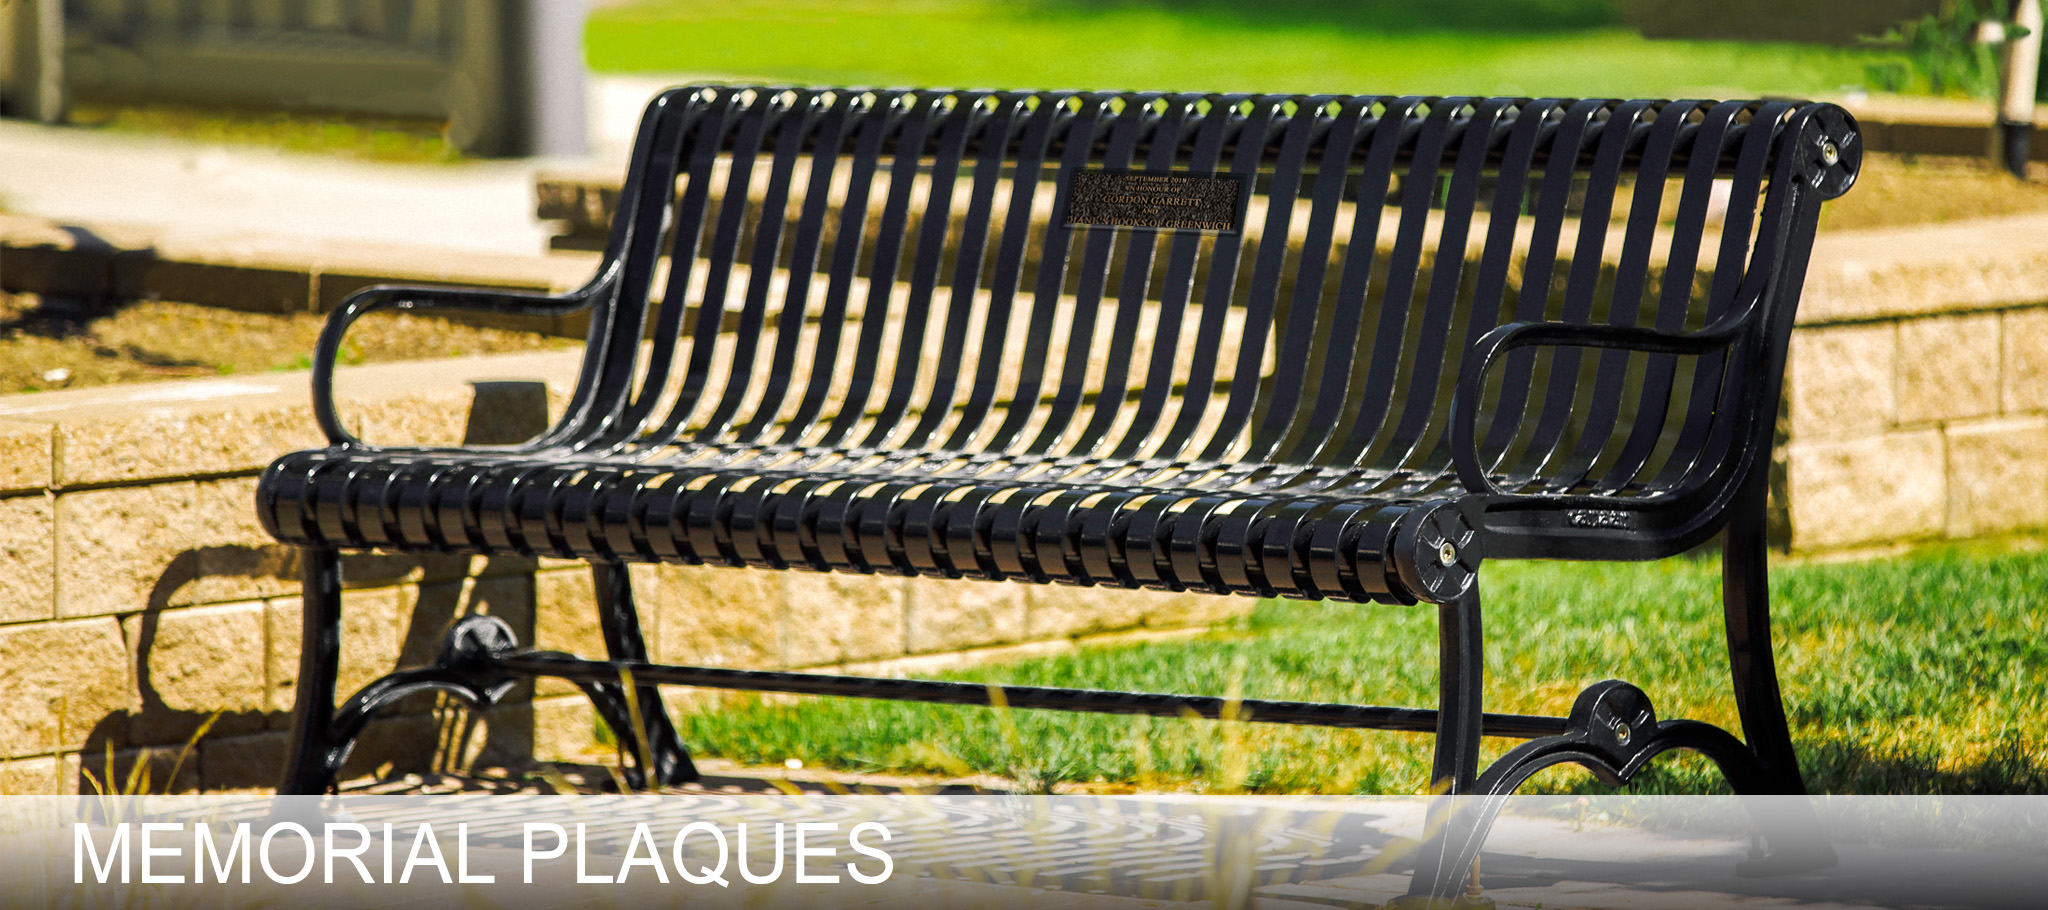 memorial plaques for benches and tree guards retain precious memories of your loved ones.